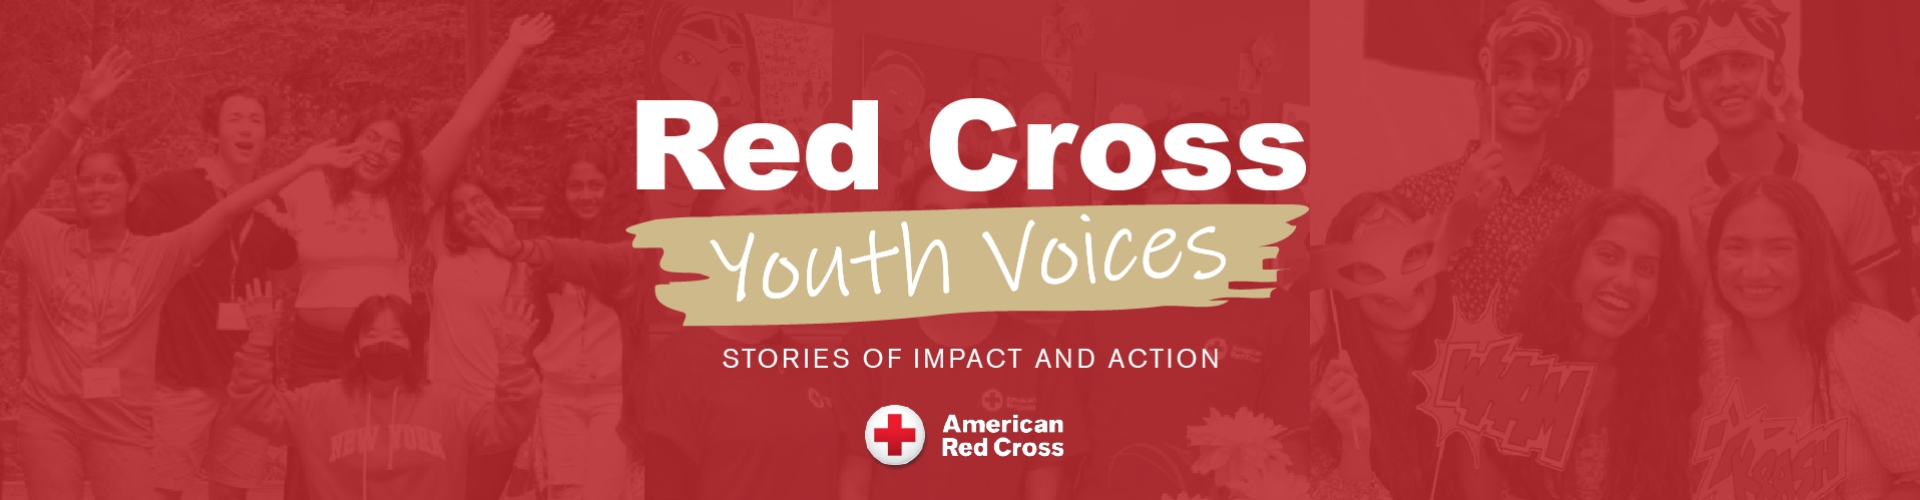 red cross you voices graphic